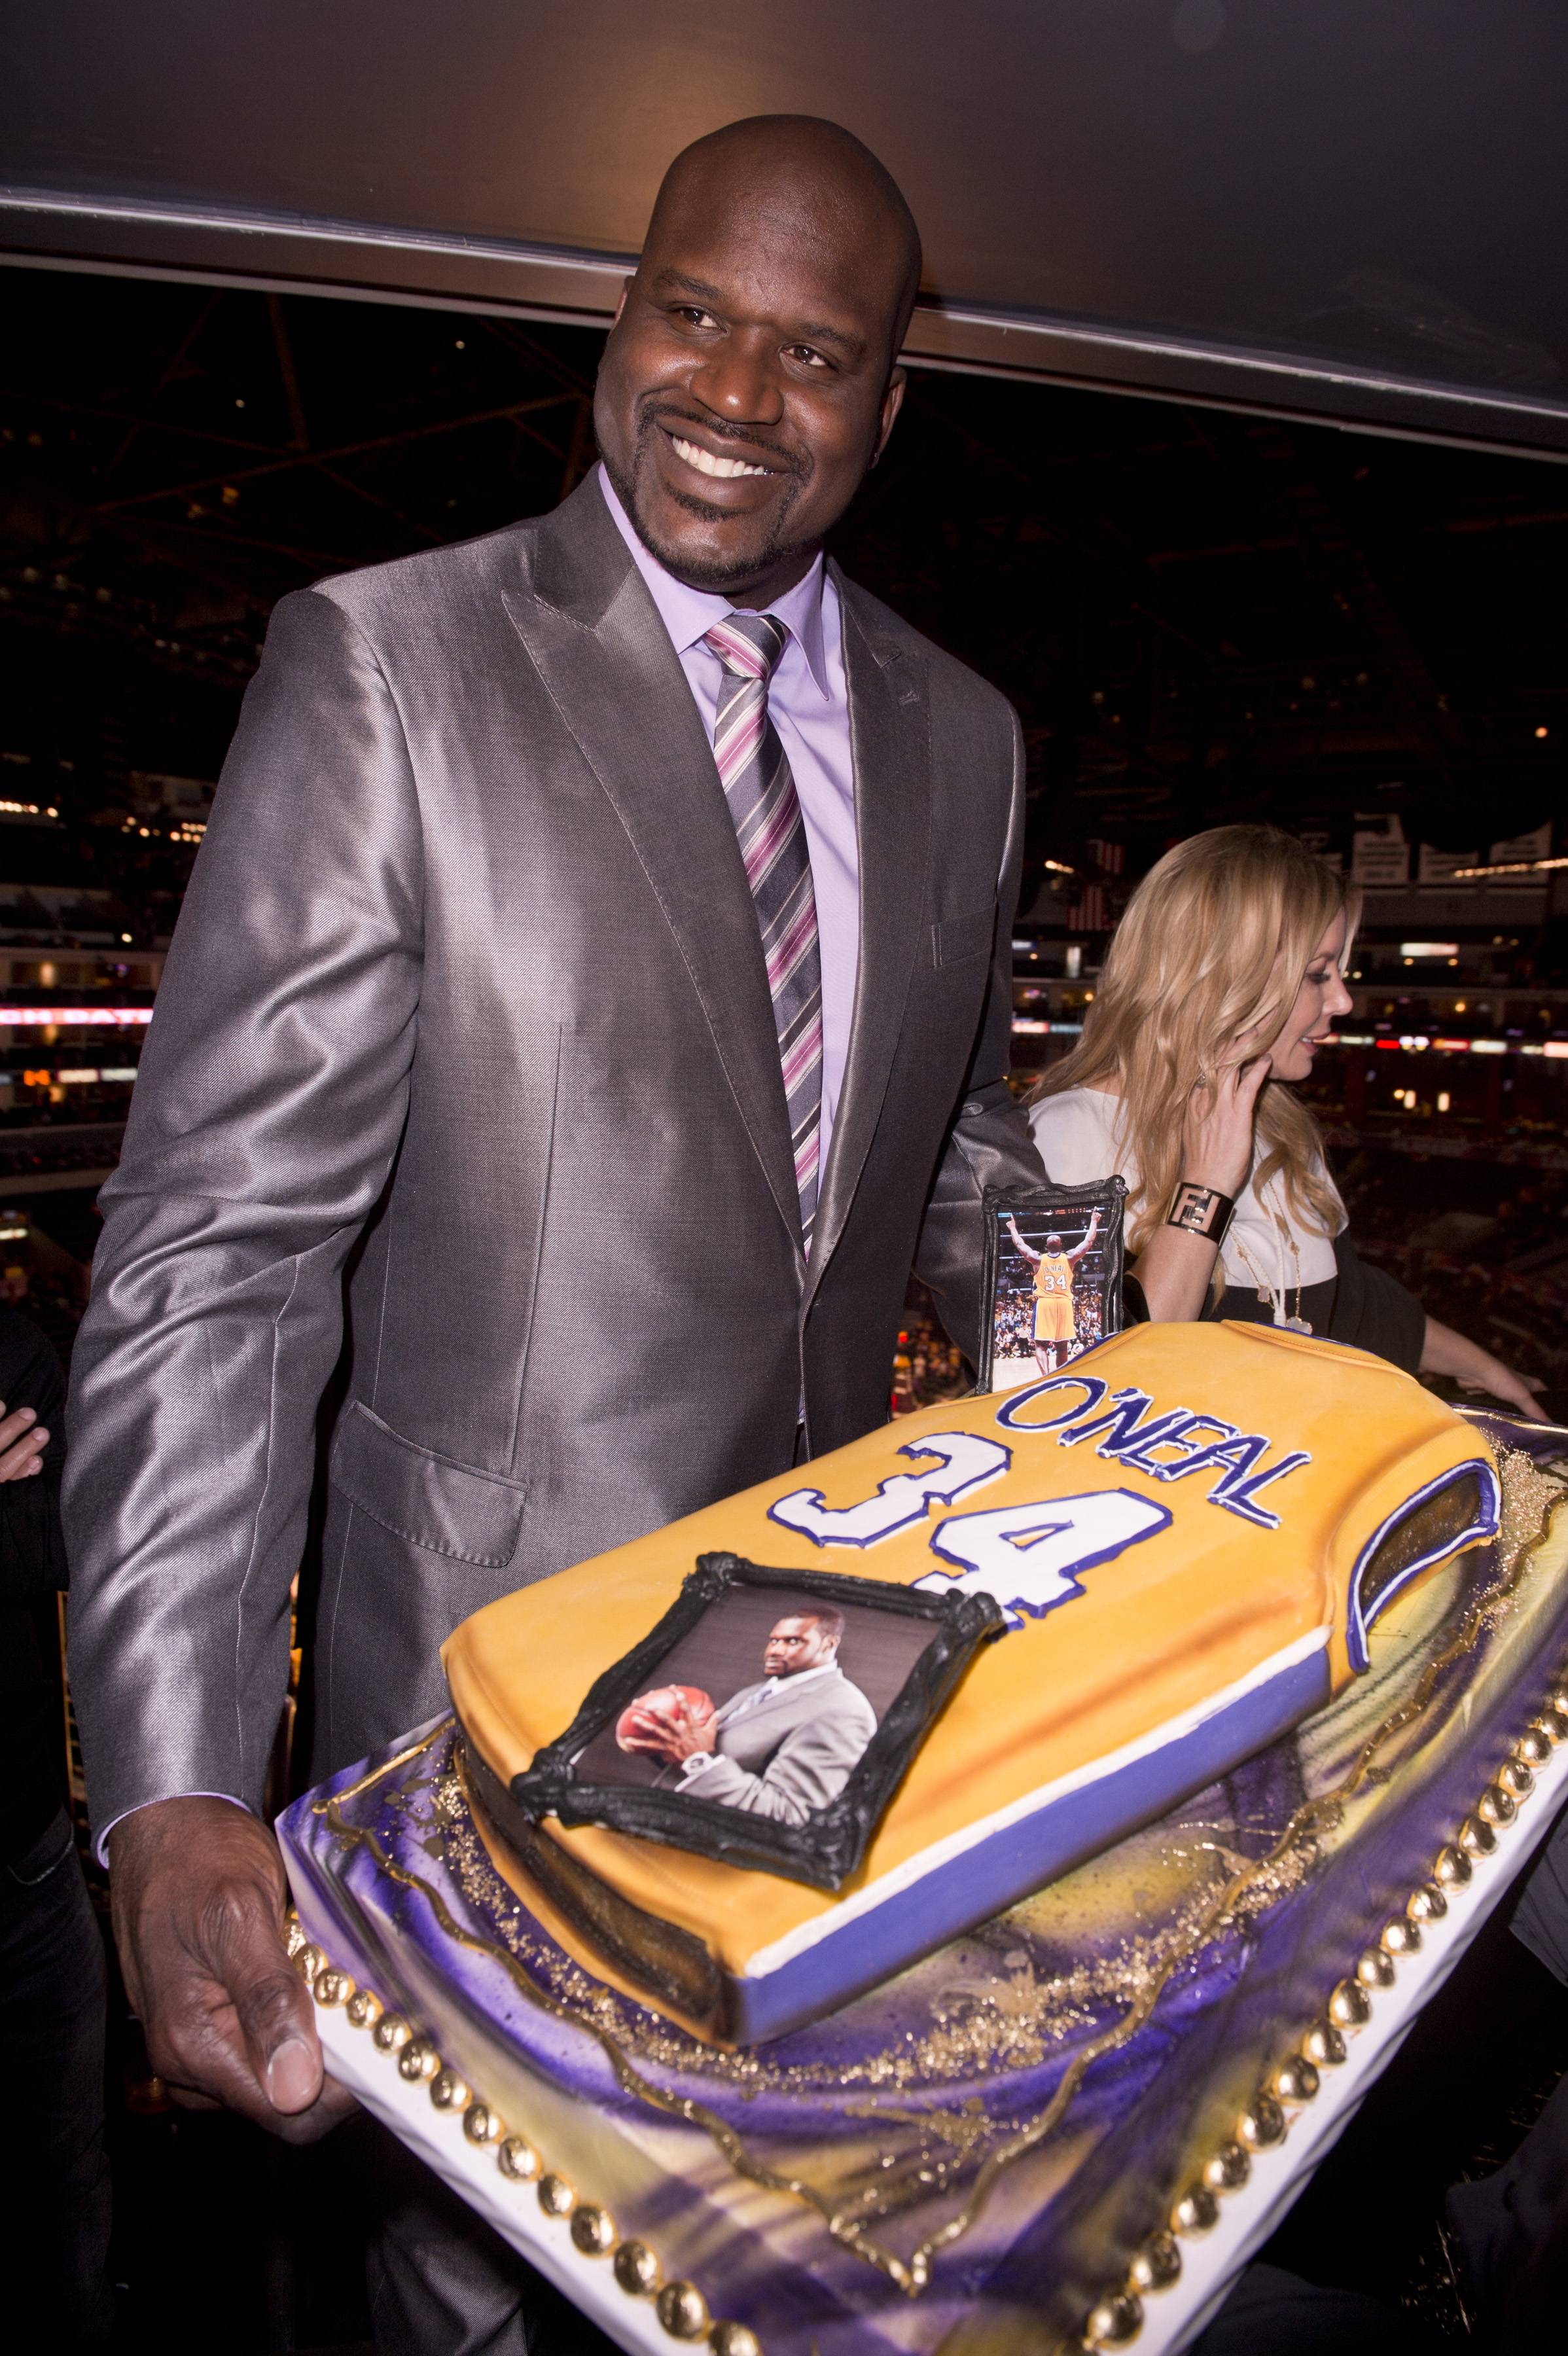 Lakers to retire Shaquille O'Neal's number 34 on April 2 - NBC Sports